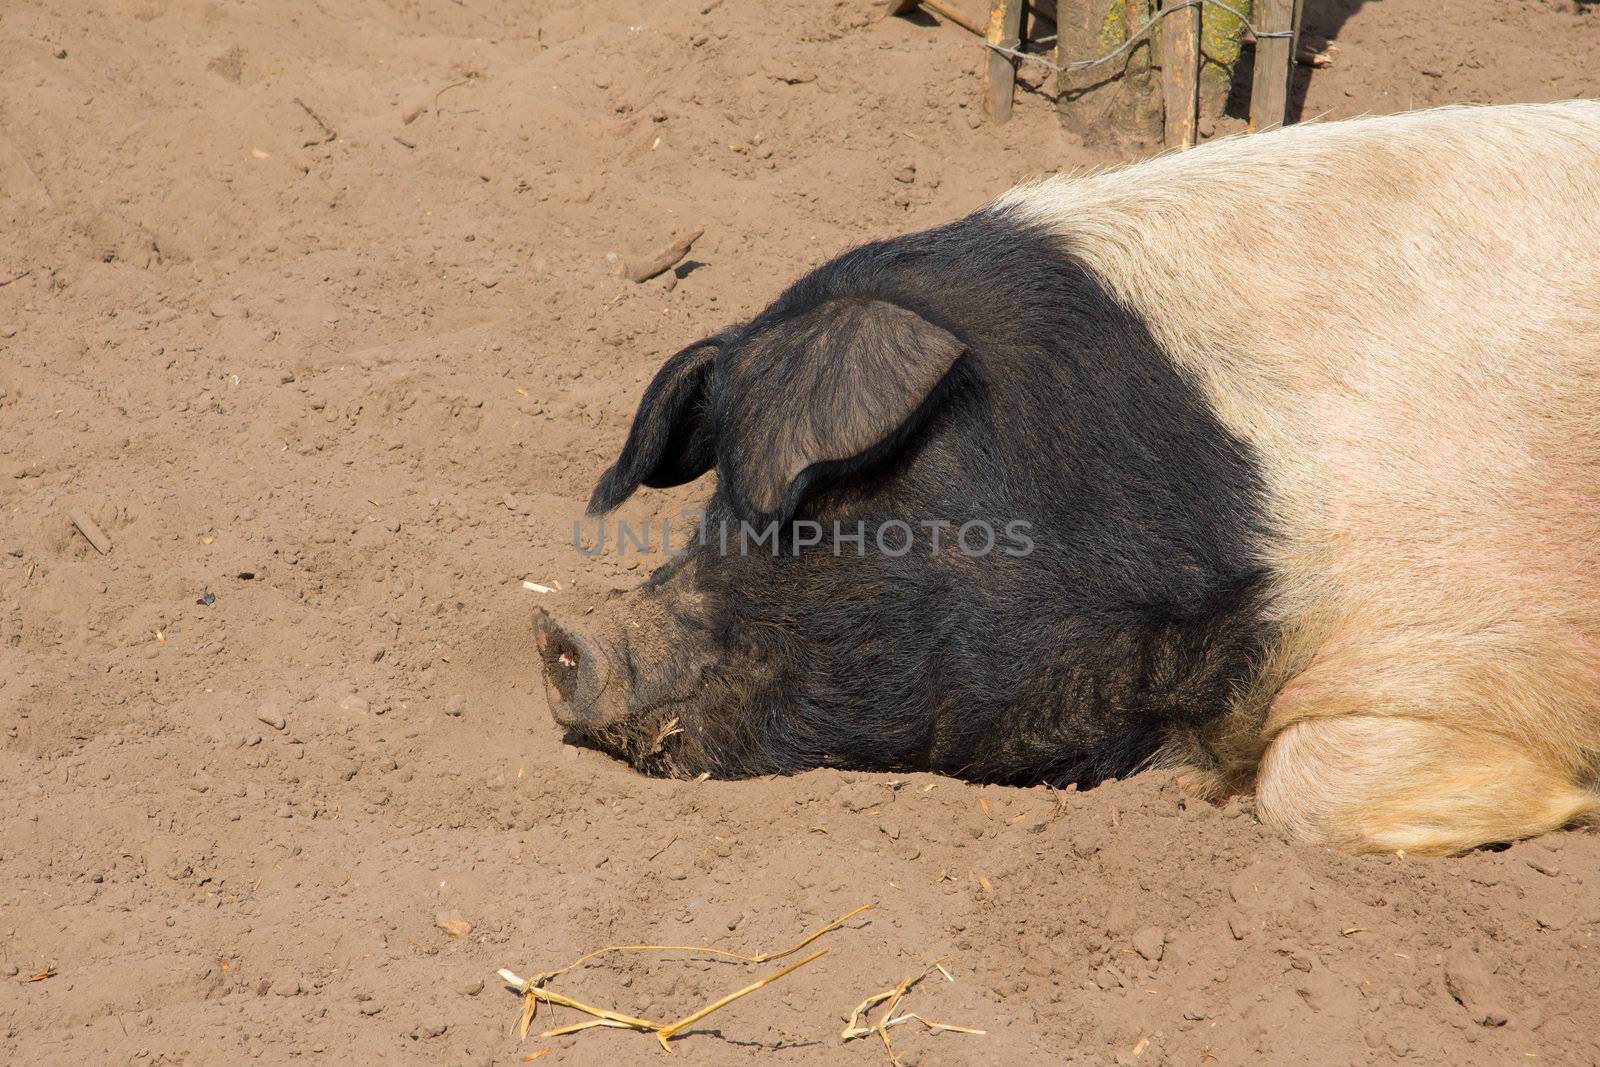 Potbellied pig, sleeping in the sand